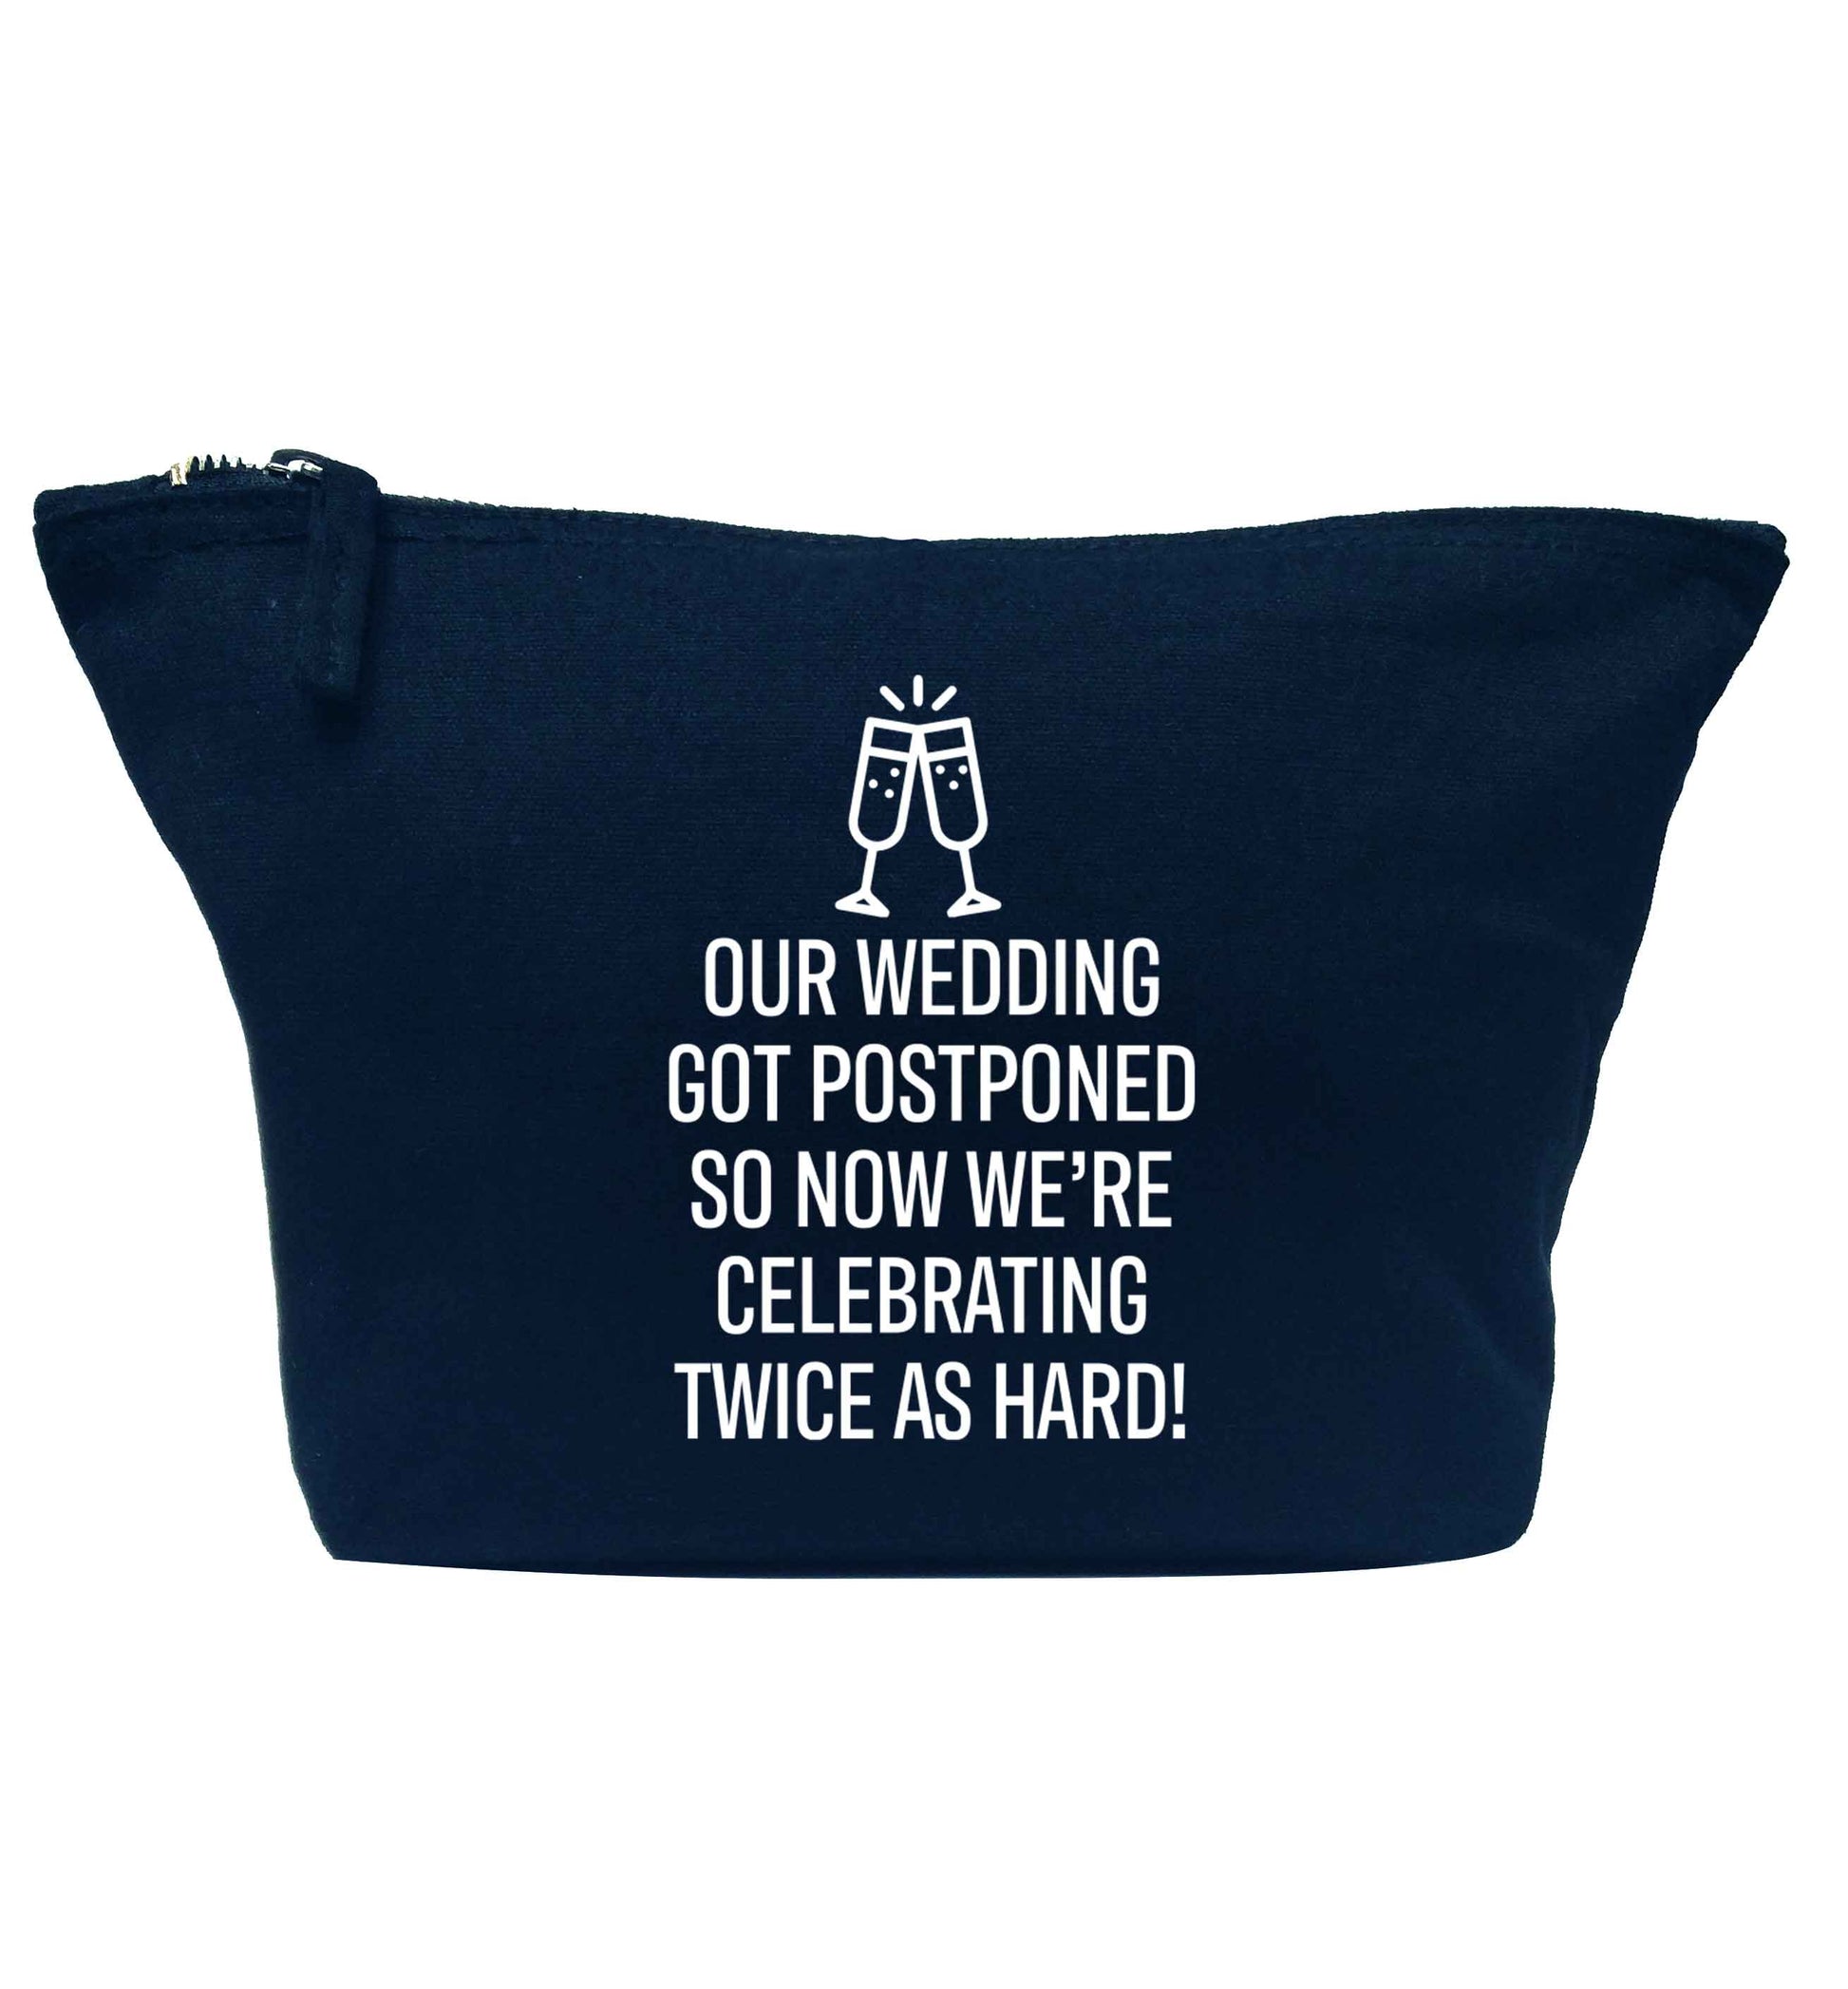 Postponed wedding? Sounds like an excuse to party twice as hard!  navy makeup bag